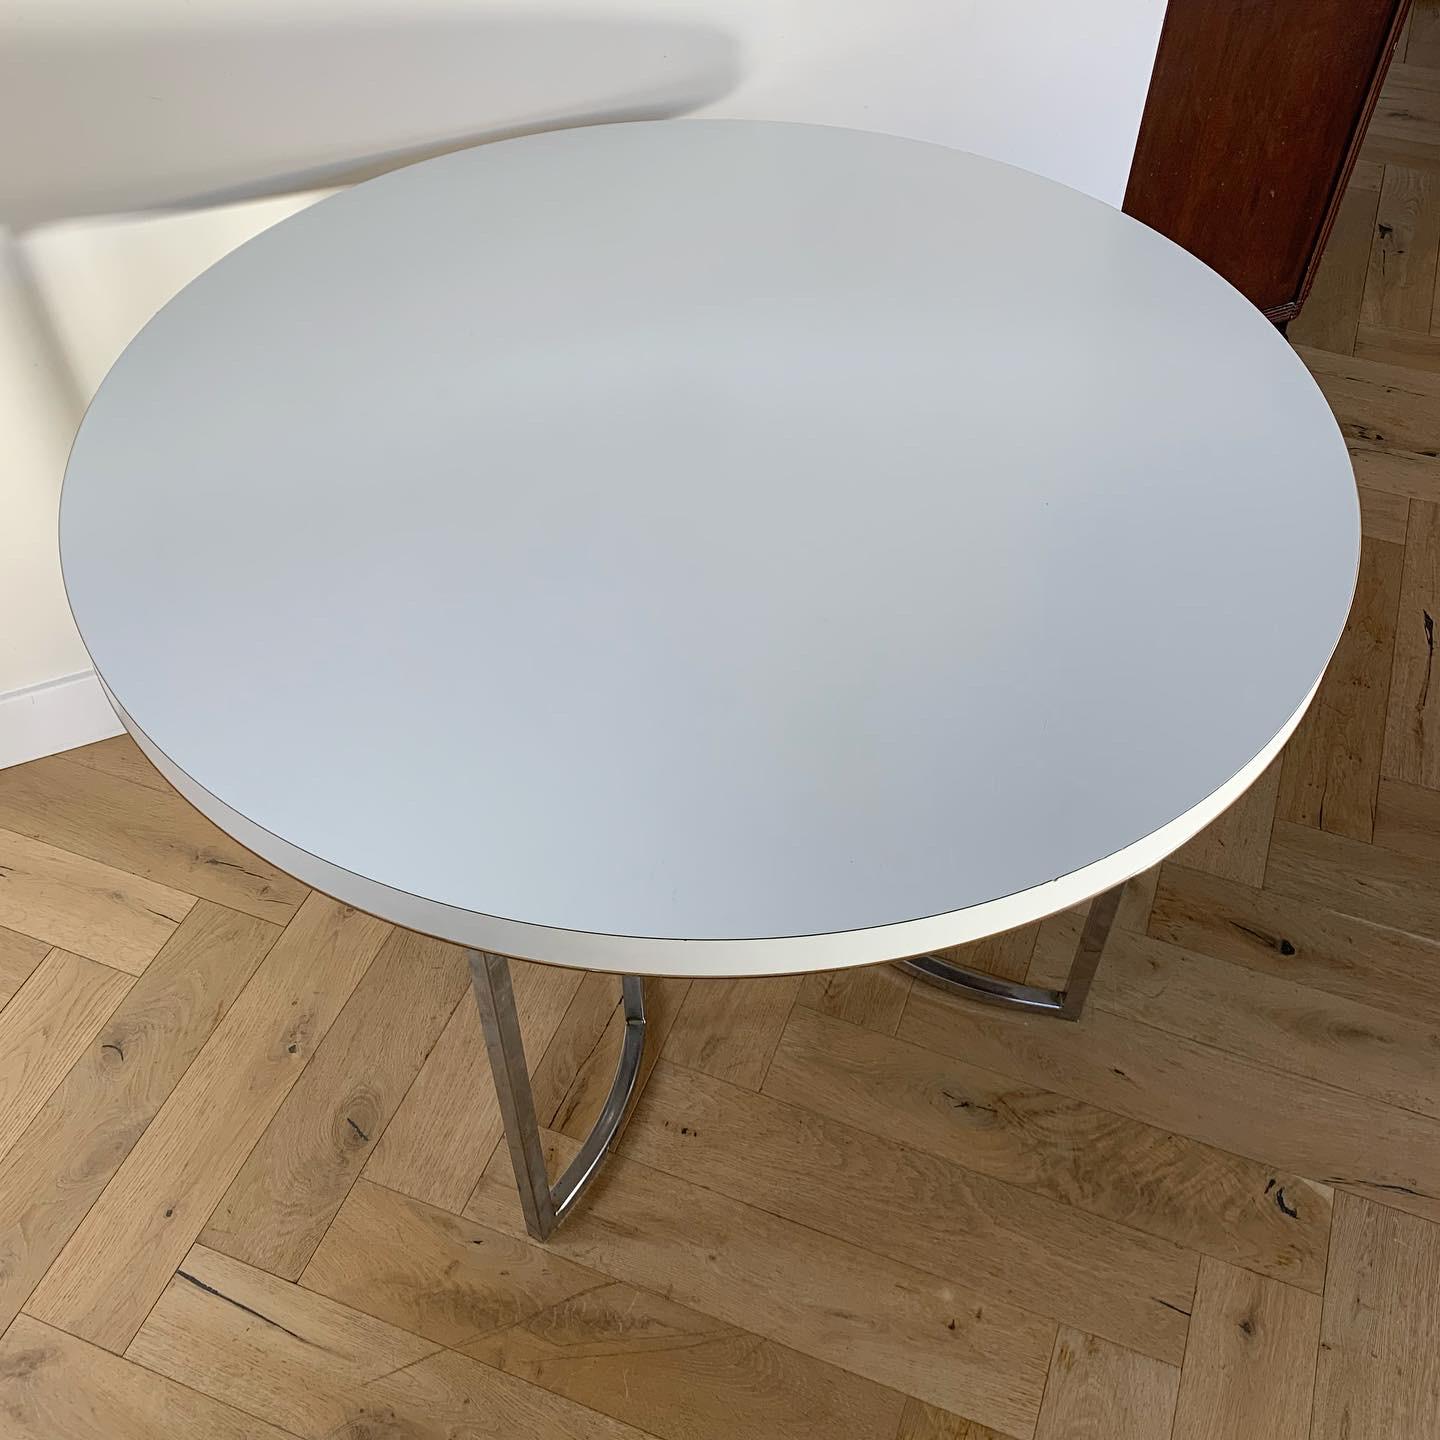 Late 20th Century Cal-Style Chrome and Laminate Dinette Bistro Table, circa 1972